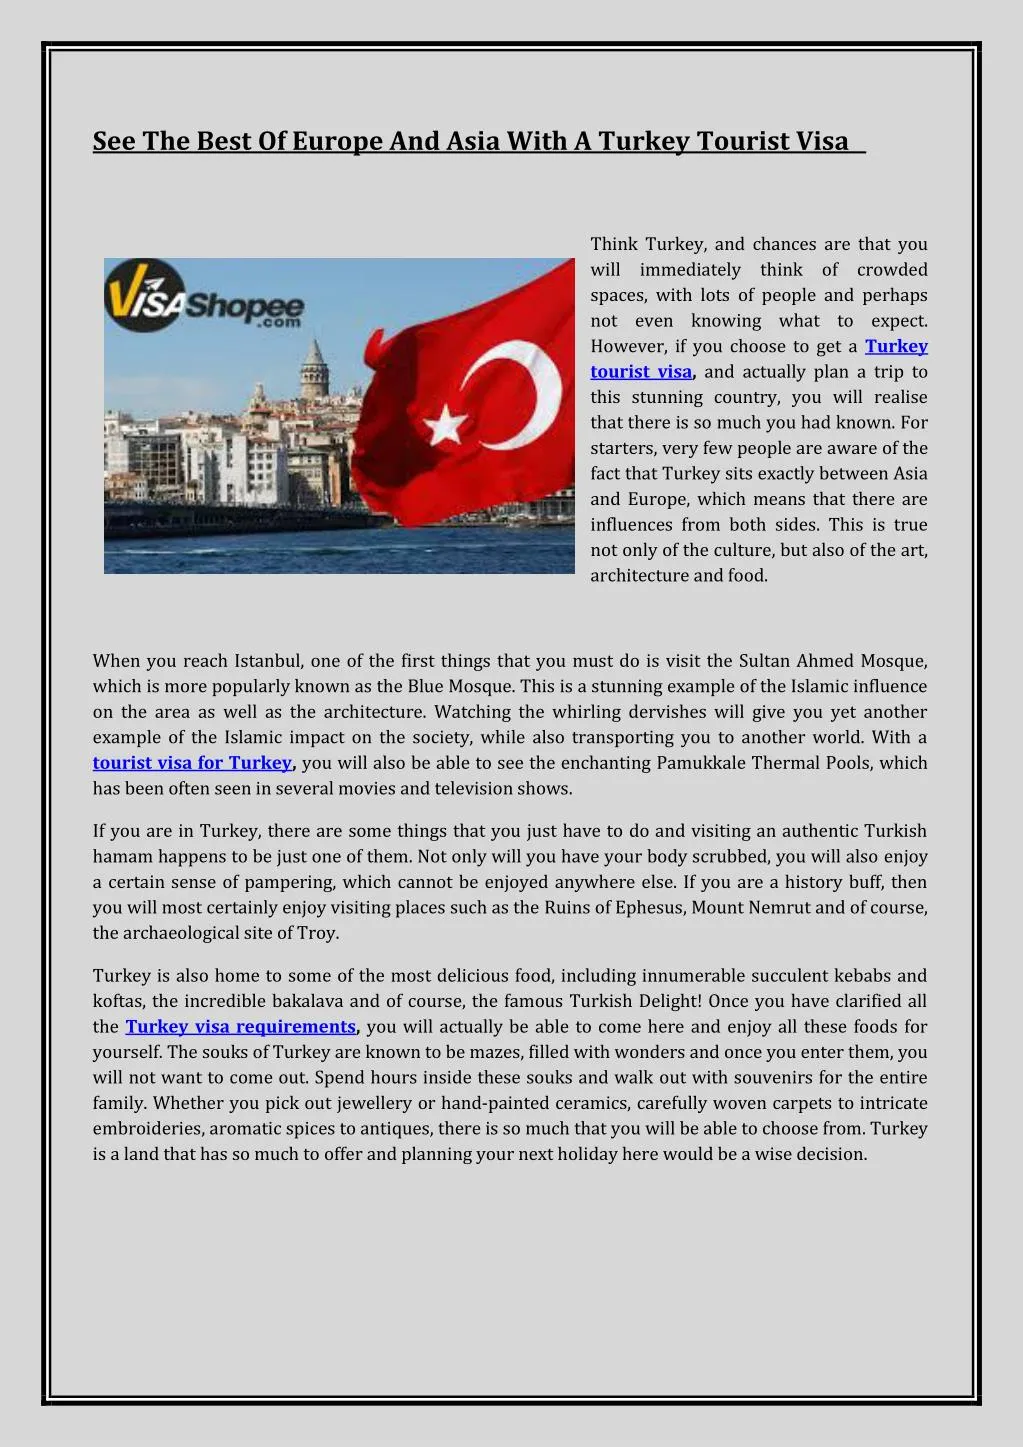 see the best of europe and asia with a turkey